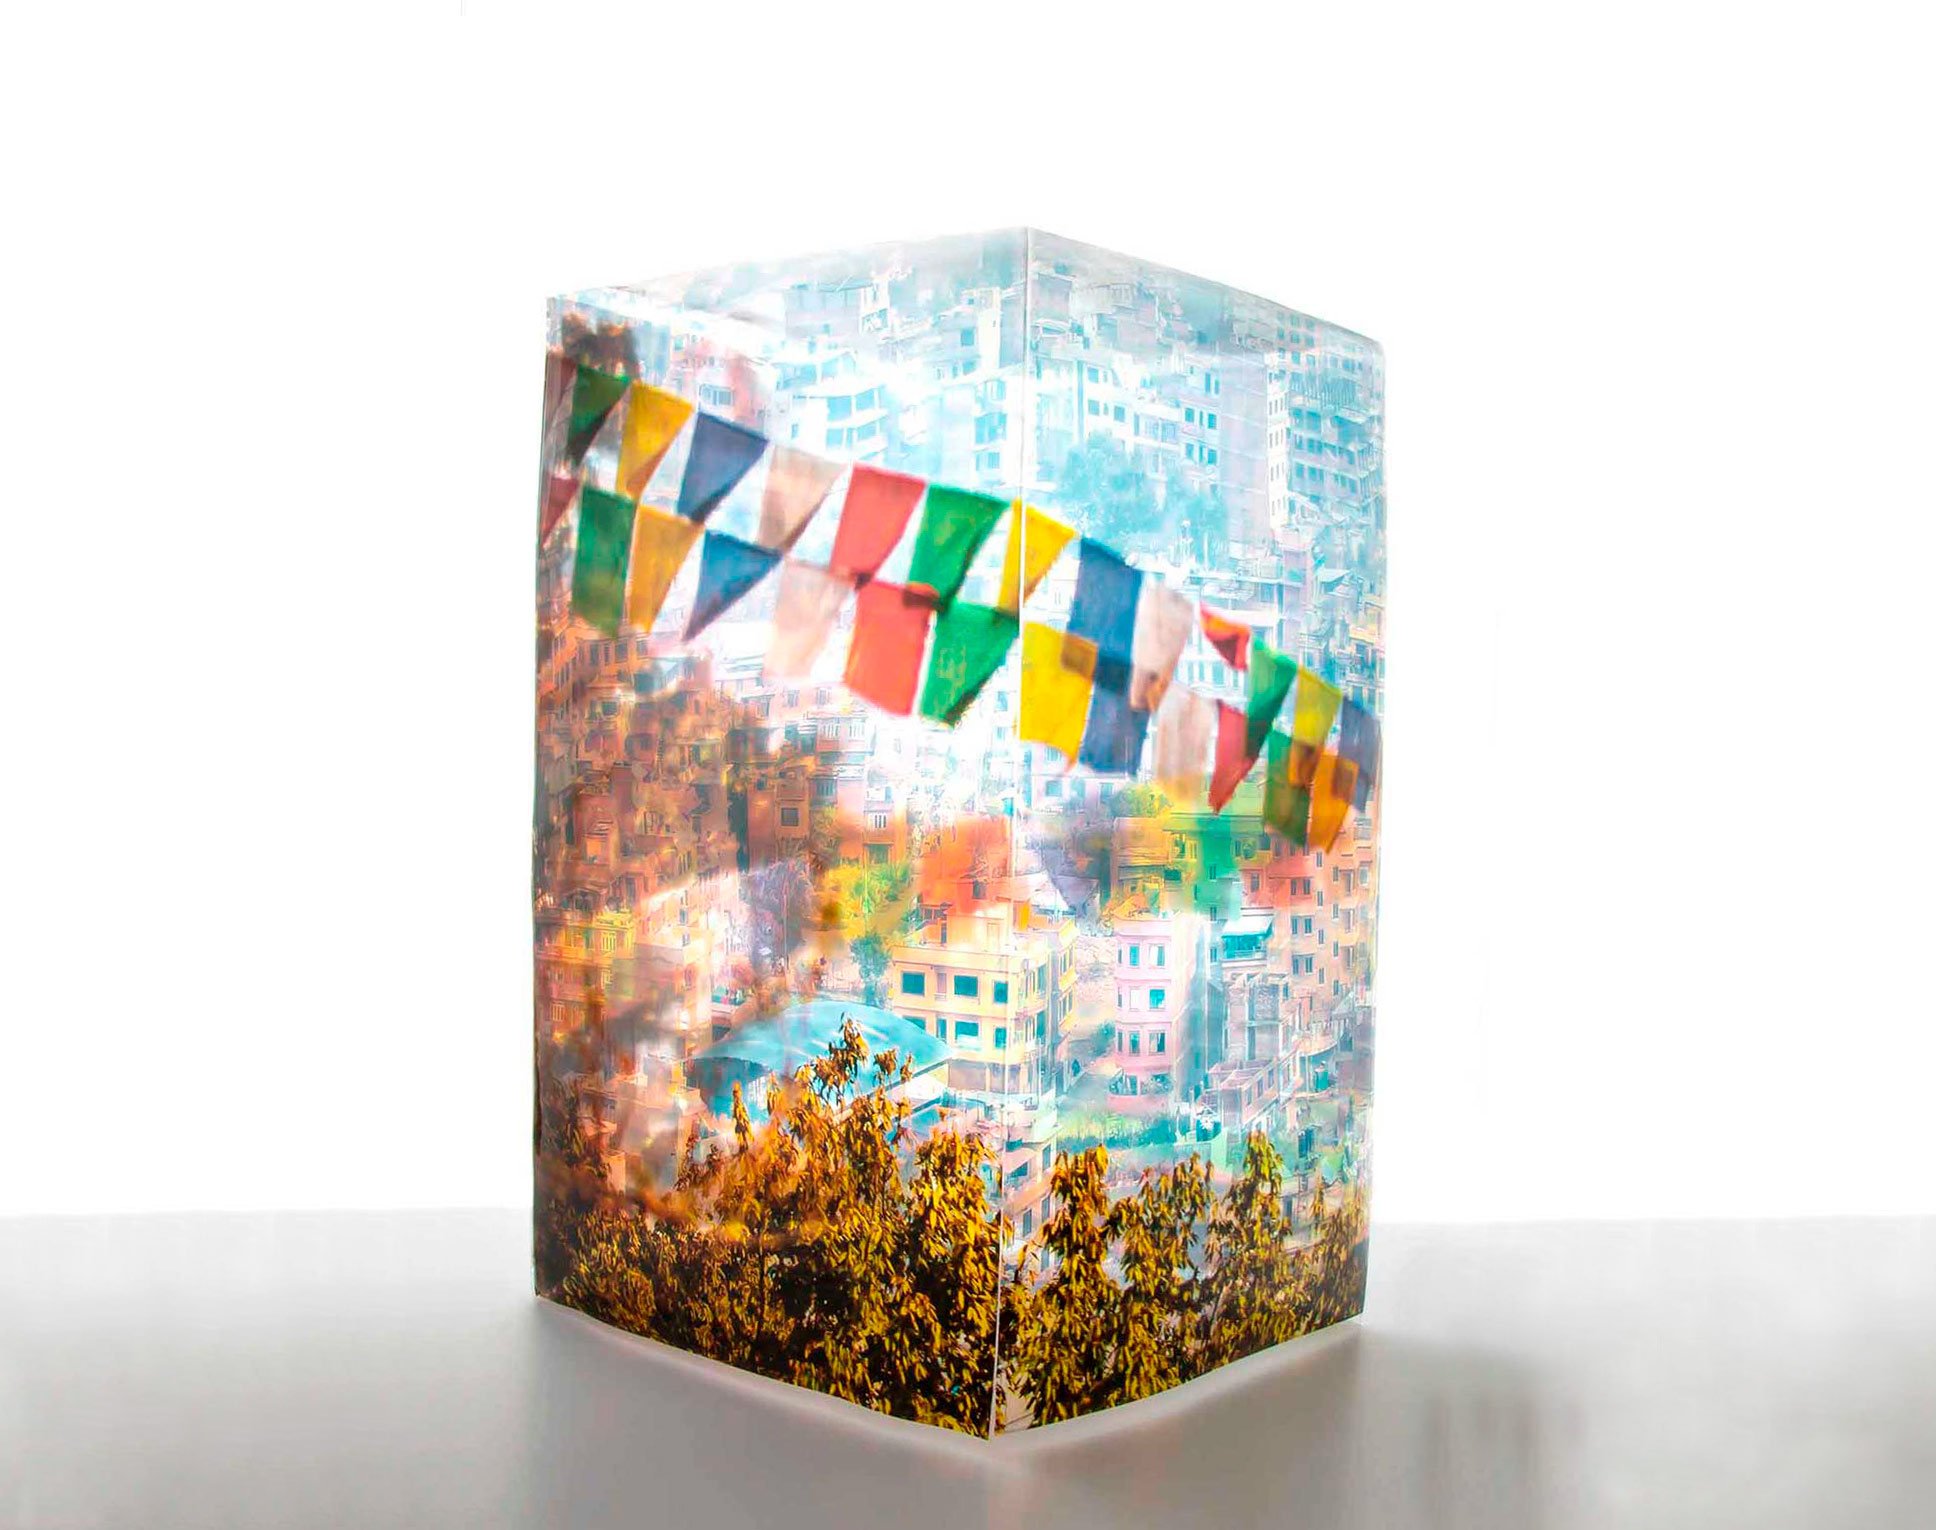 Photographic transparent sheet of Monkey Temple, Nepal, fused together to create a three-dimensional box.